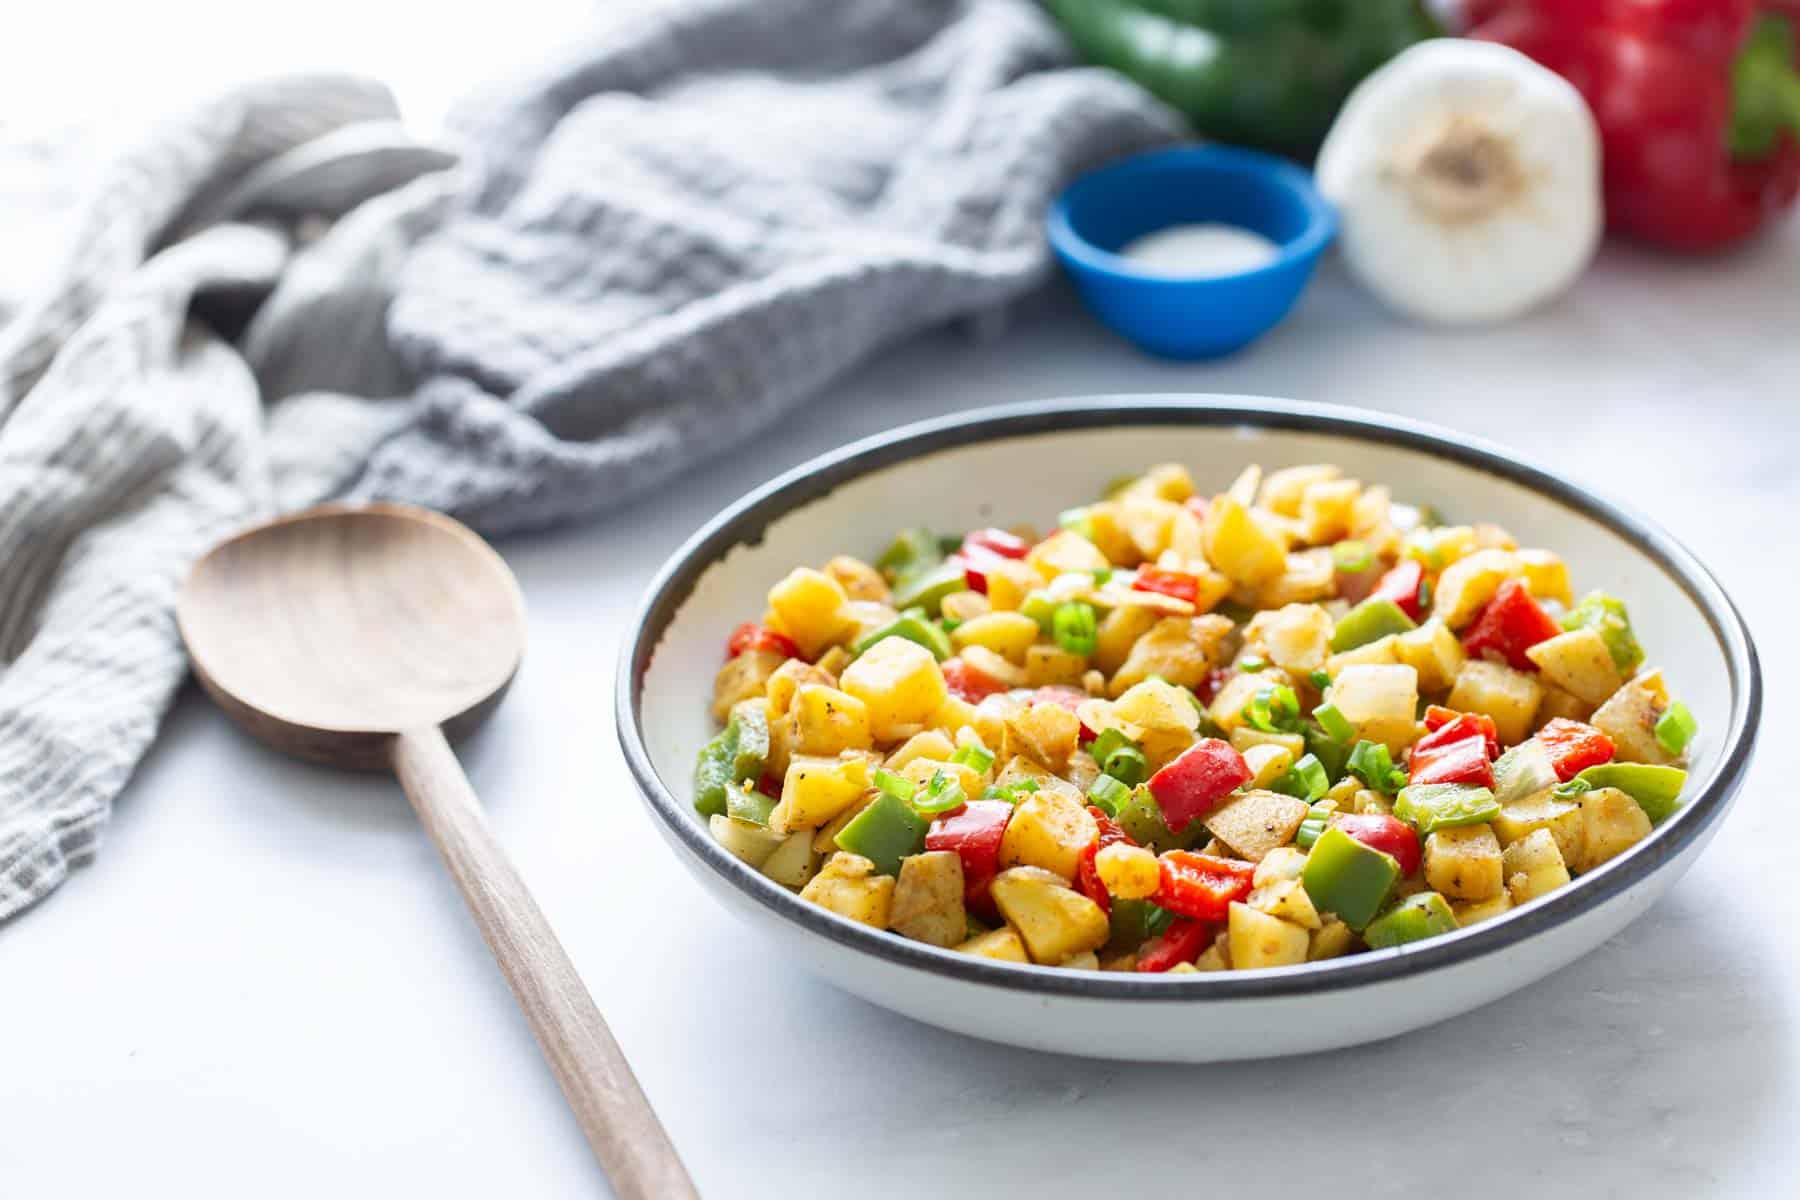 A colorful sautéed vegetable dish in a pan, with fresh ingredients on the side and a wooden spoon.